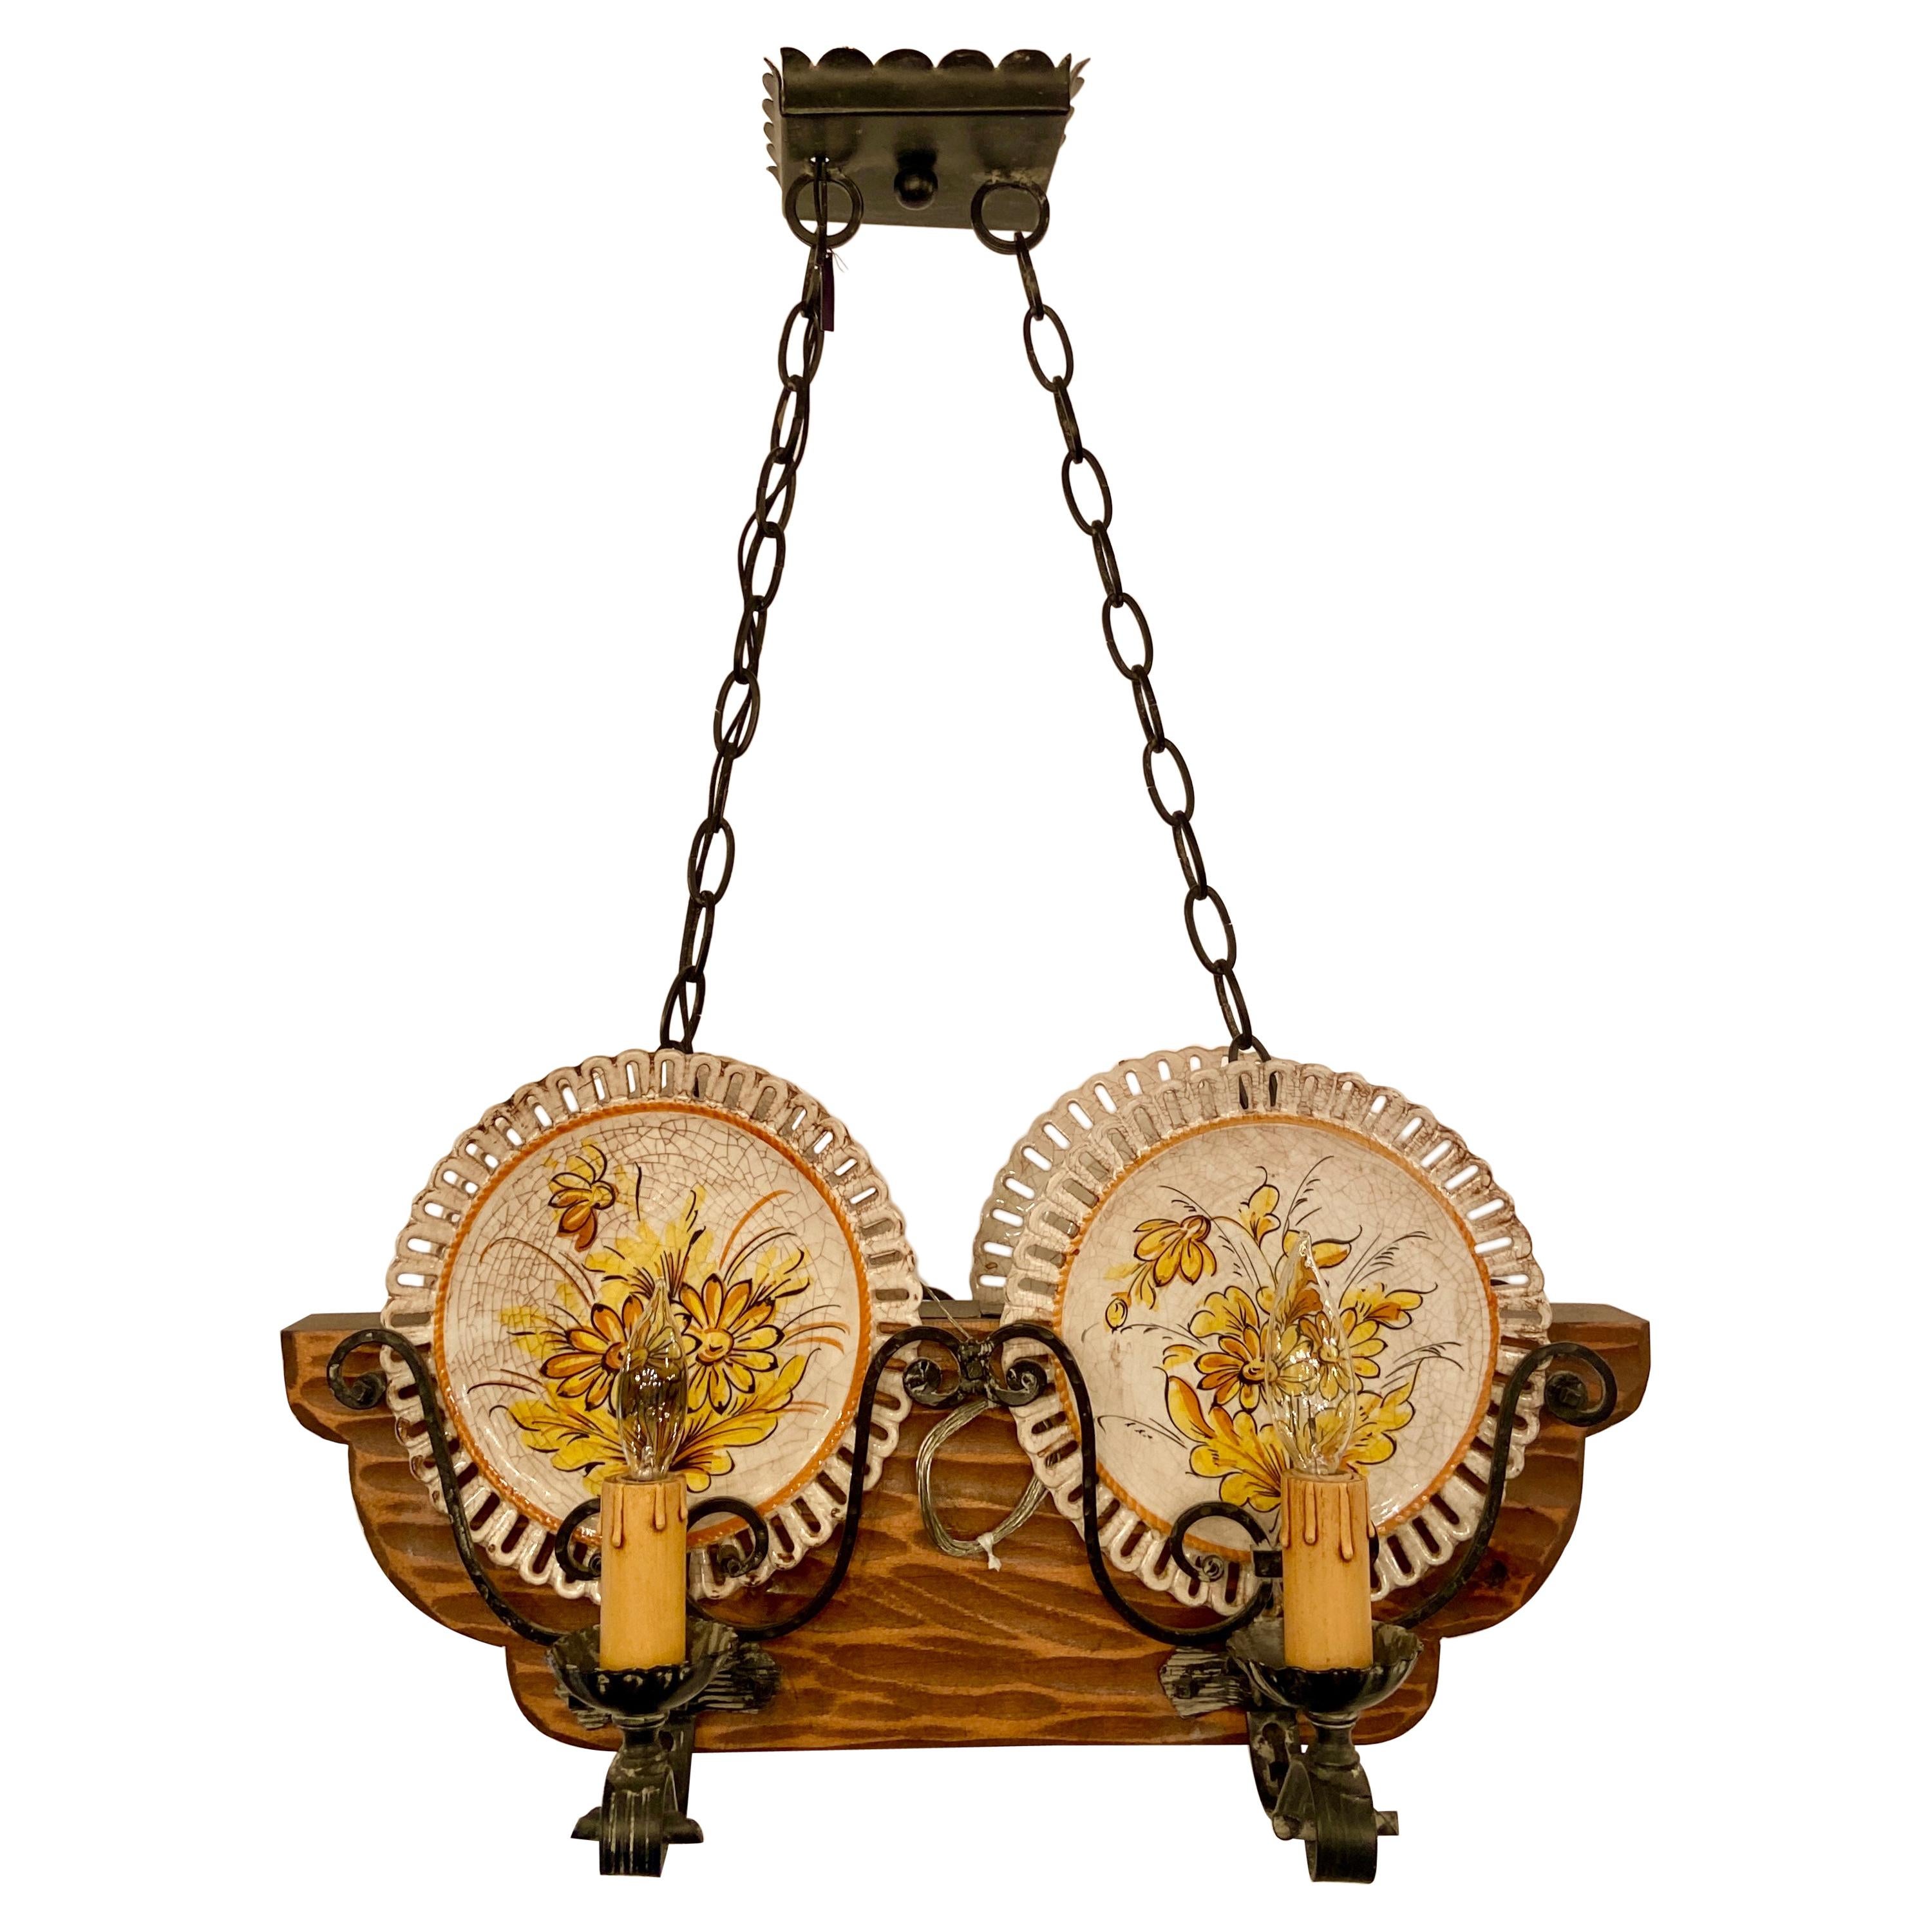 Hand-Made Wrought Iron and Carved Wood Porcelain Plate-Holder Chandelier For Sale